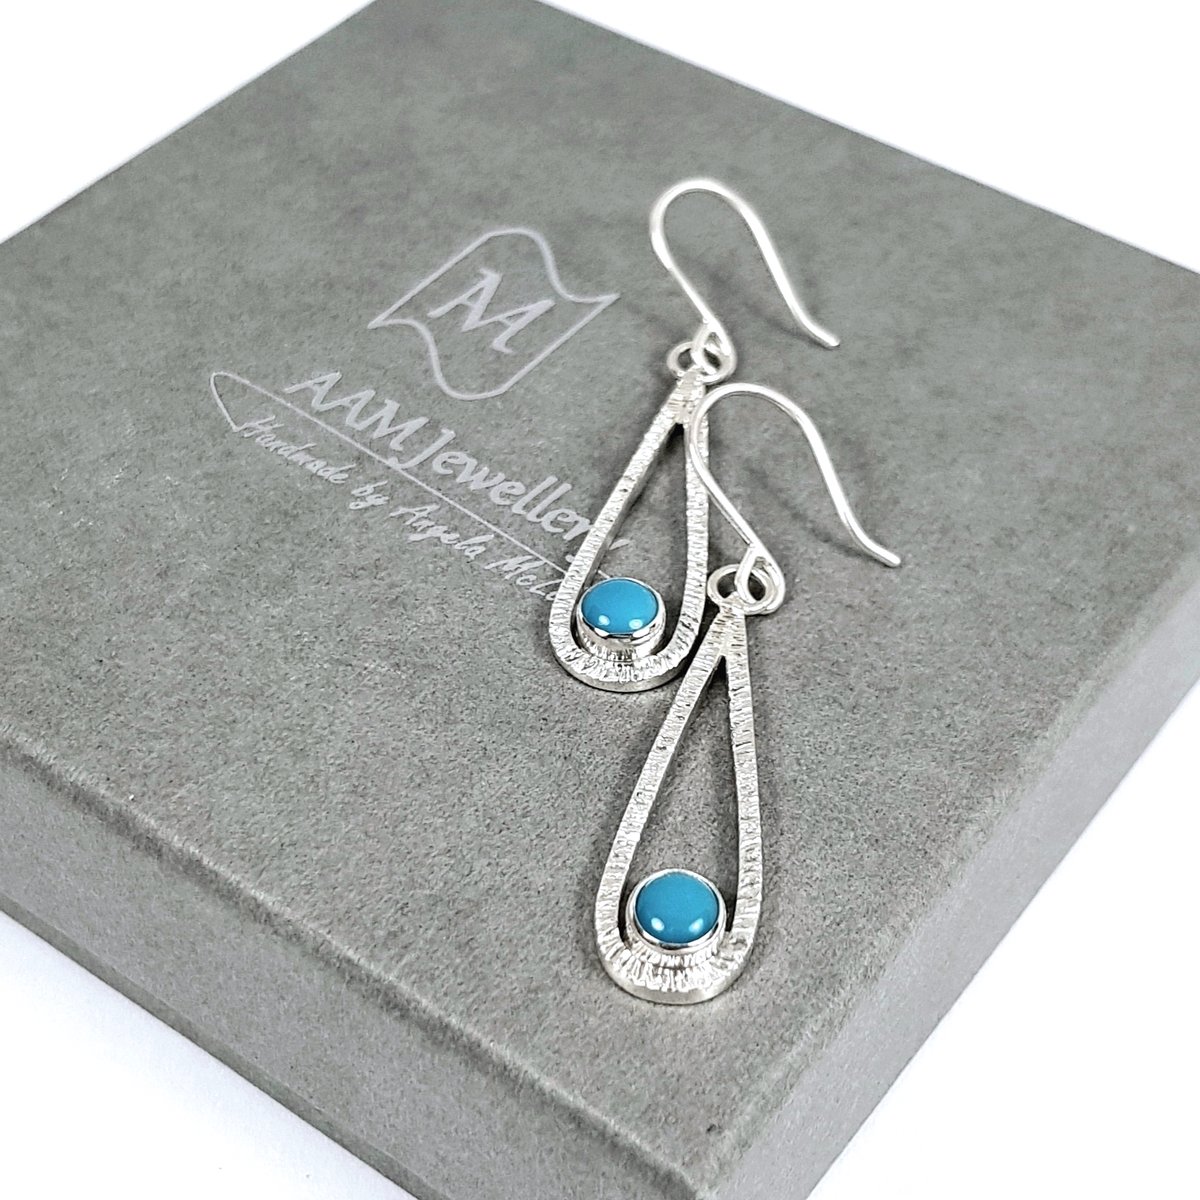 Image of Turquoise Dangle Earrings, Handmade Sterling Silver Earrings with Genuine Turquoise, Recycled Silver